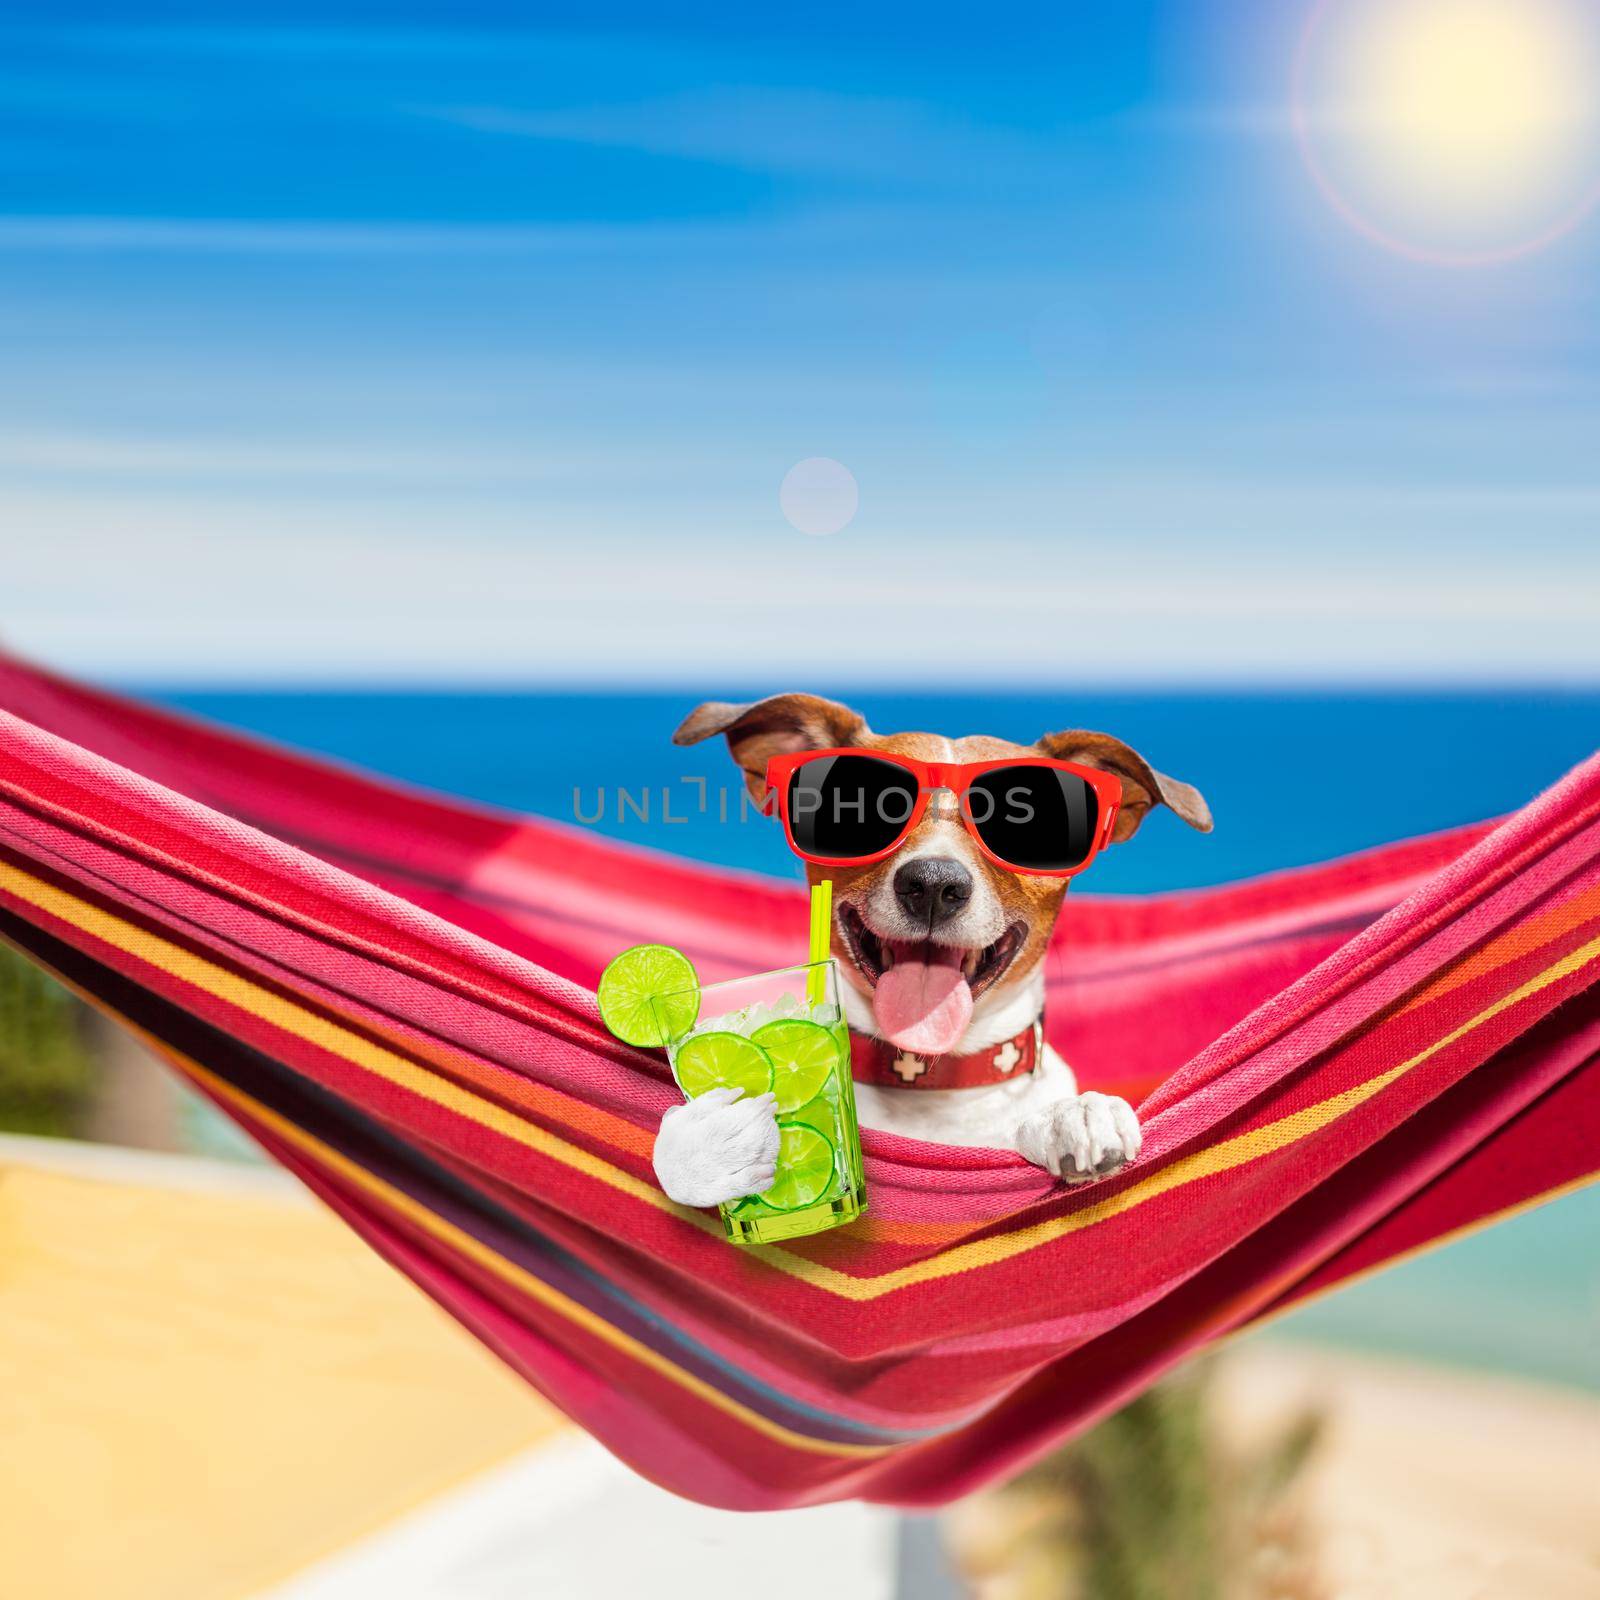 jack russell dog relaxing on a fancy red  hammock  with caipirinha cocktail, on summer vacation holidays at the beach